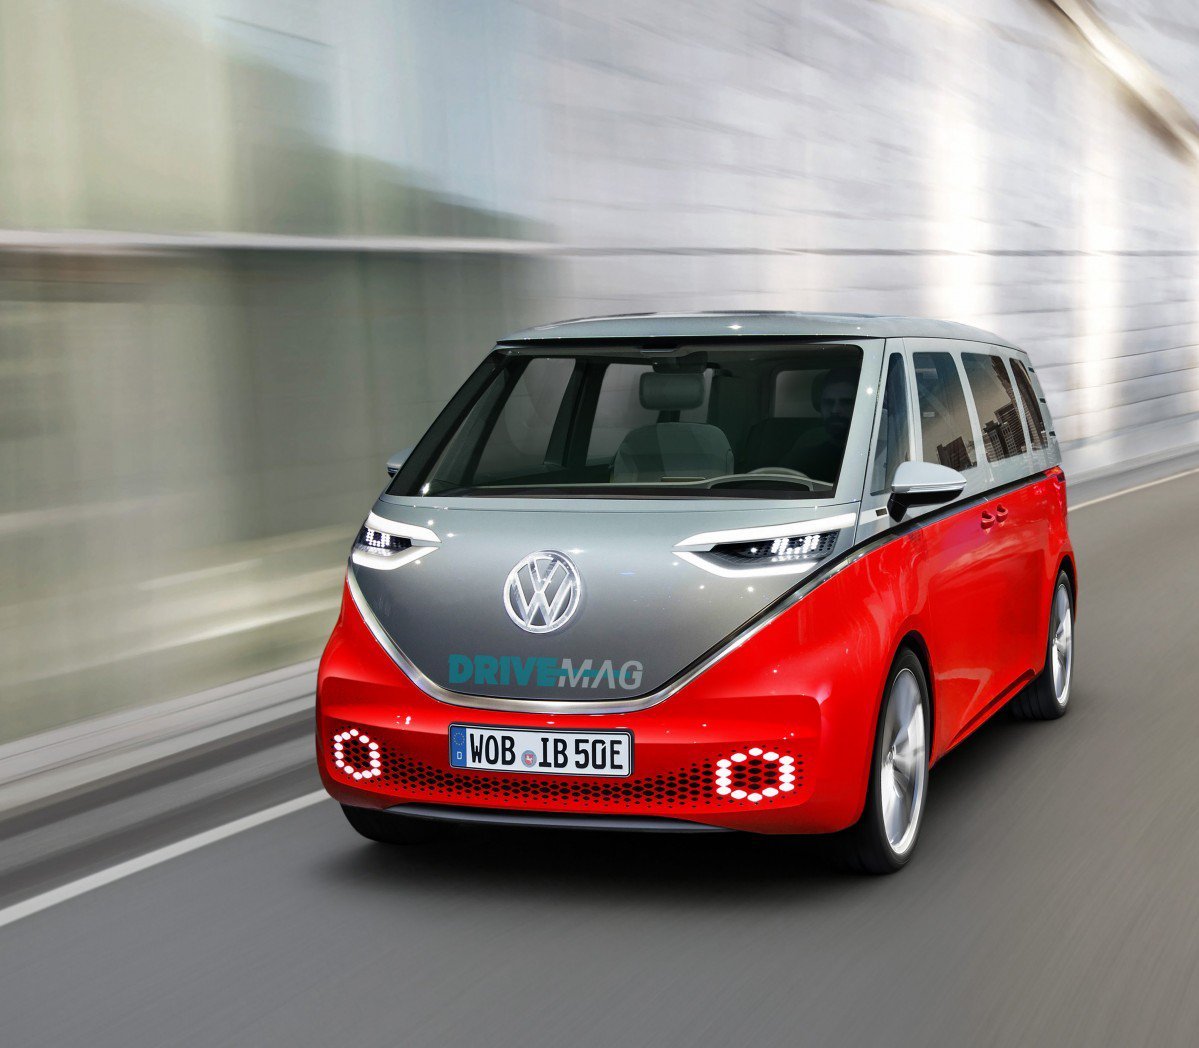 VW I D Buzz concept will turn into a production model VW 